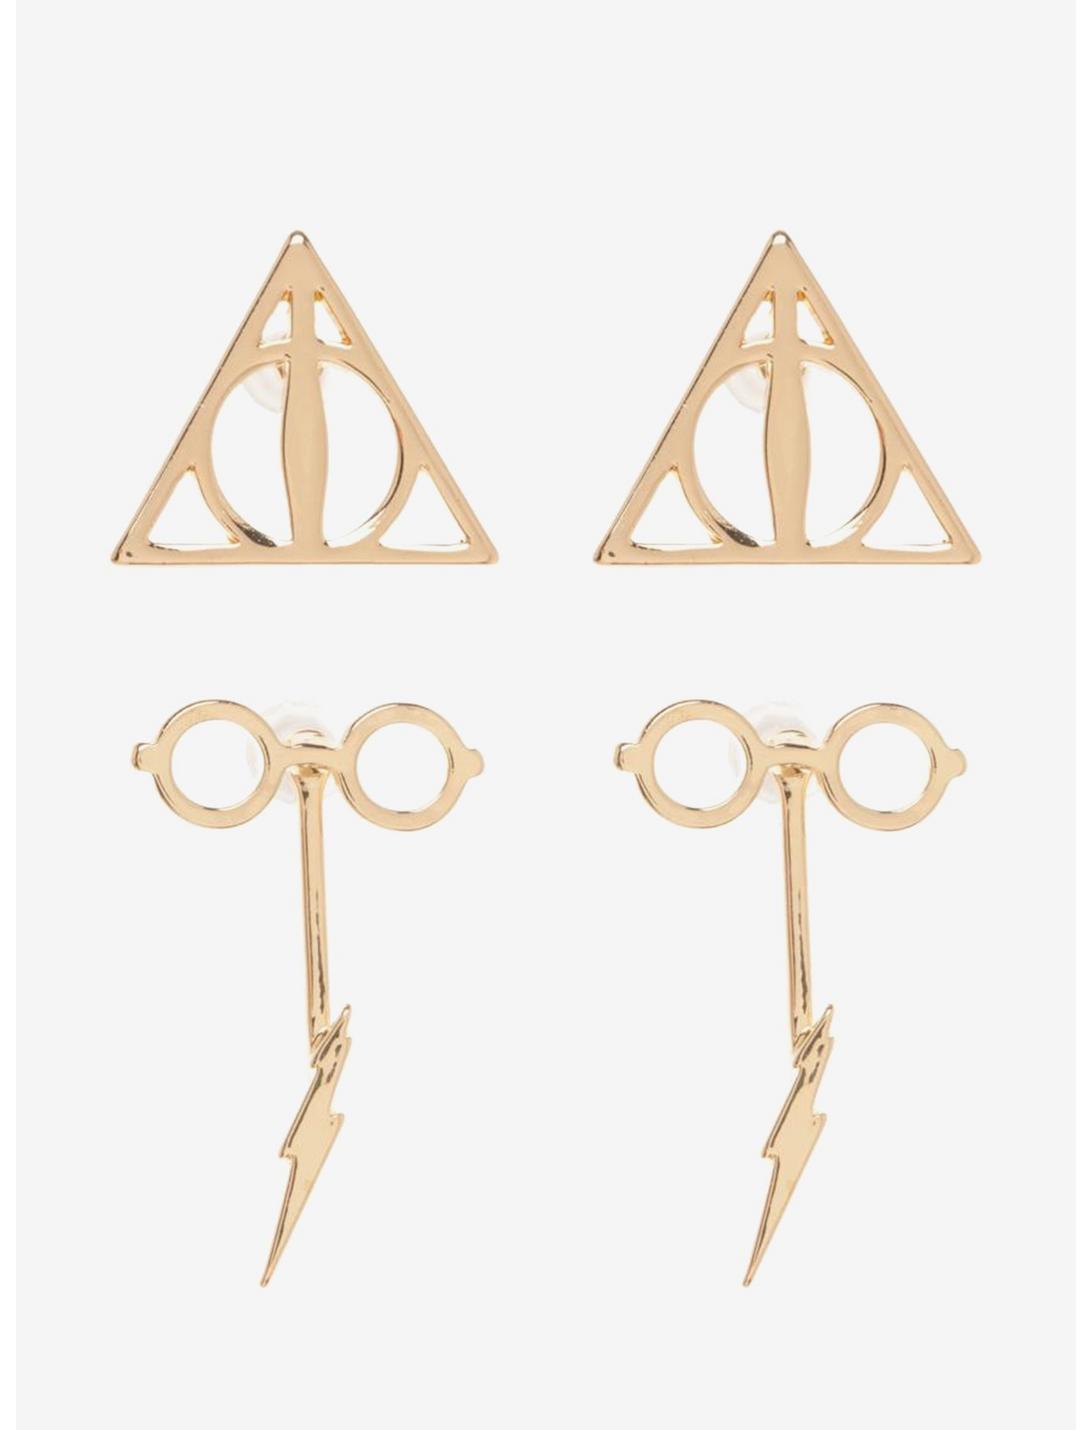 Harry Potter Deathly Hallows Earring Set, , hi-res